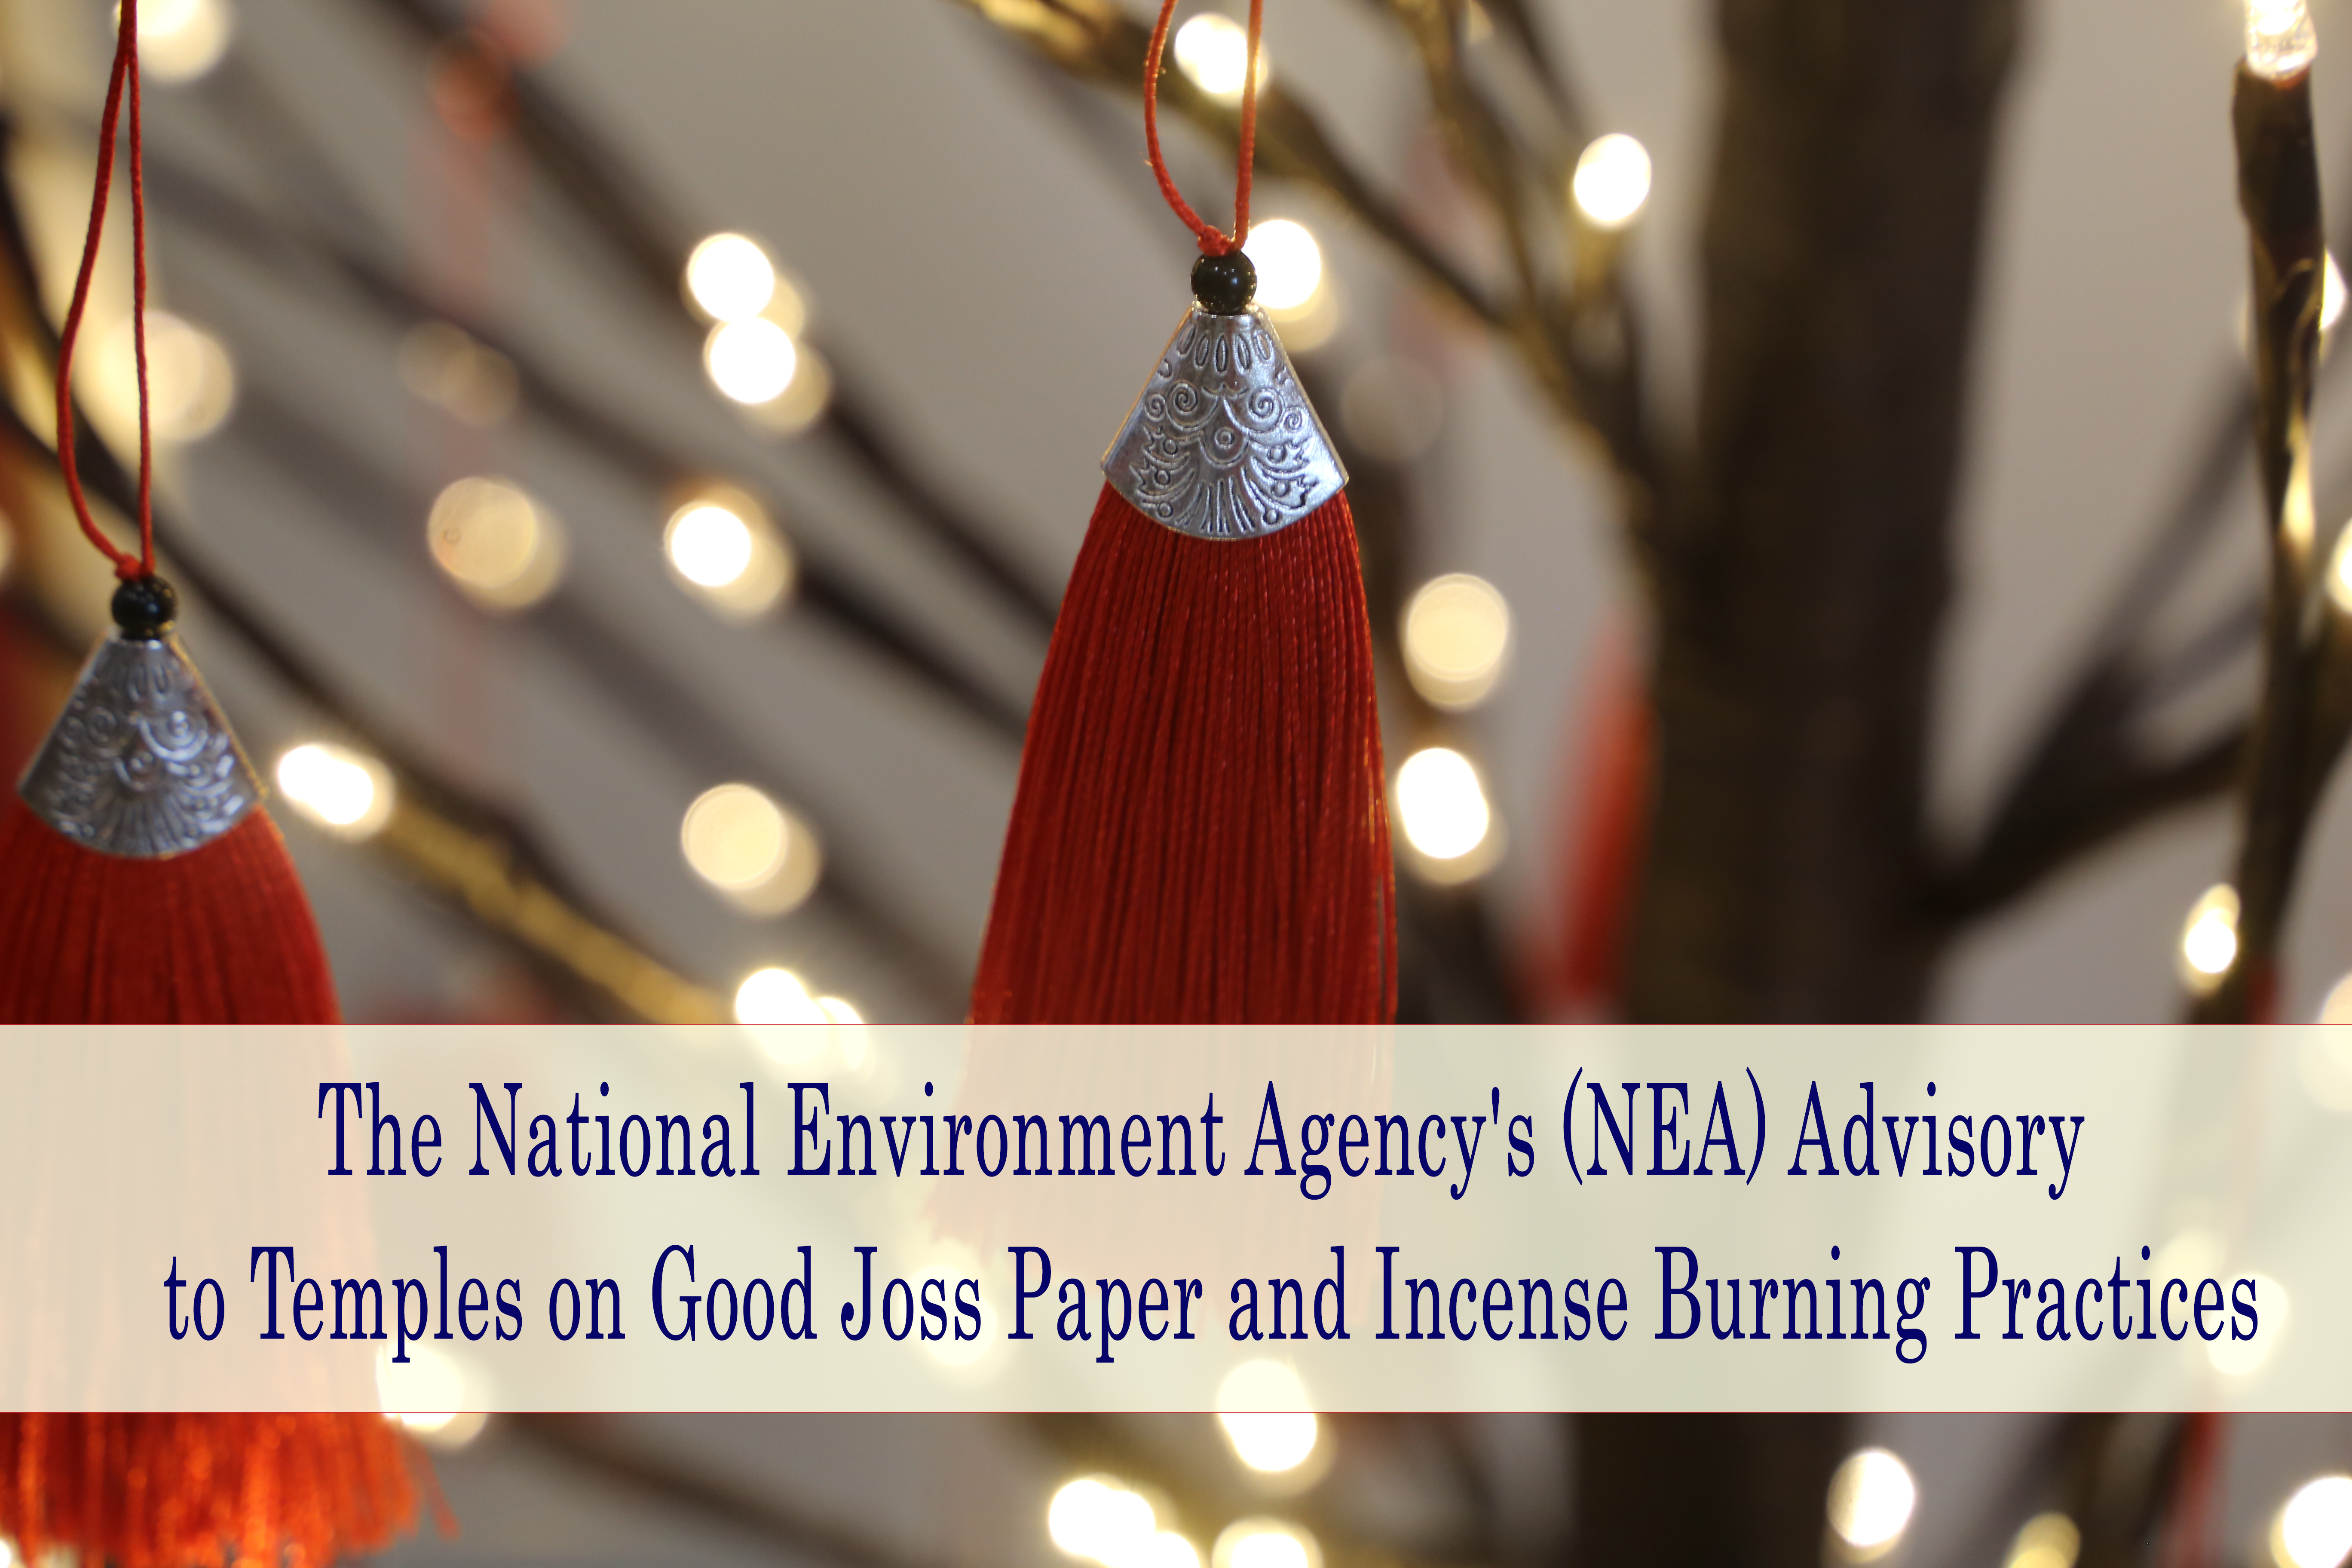 The National Environment Agency’s (NEA) Advisory to Temples on Good Joss Paper and Incense Burning Practices